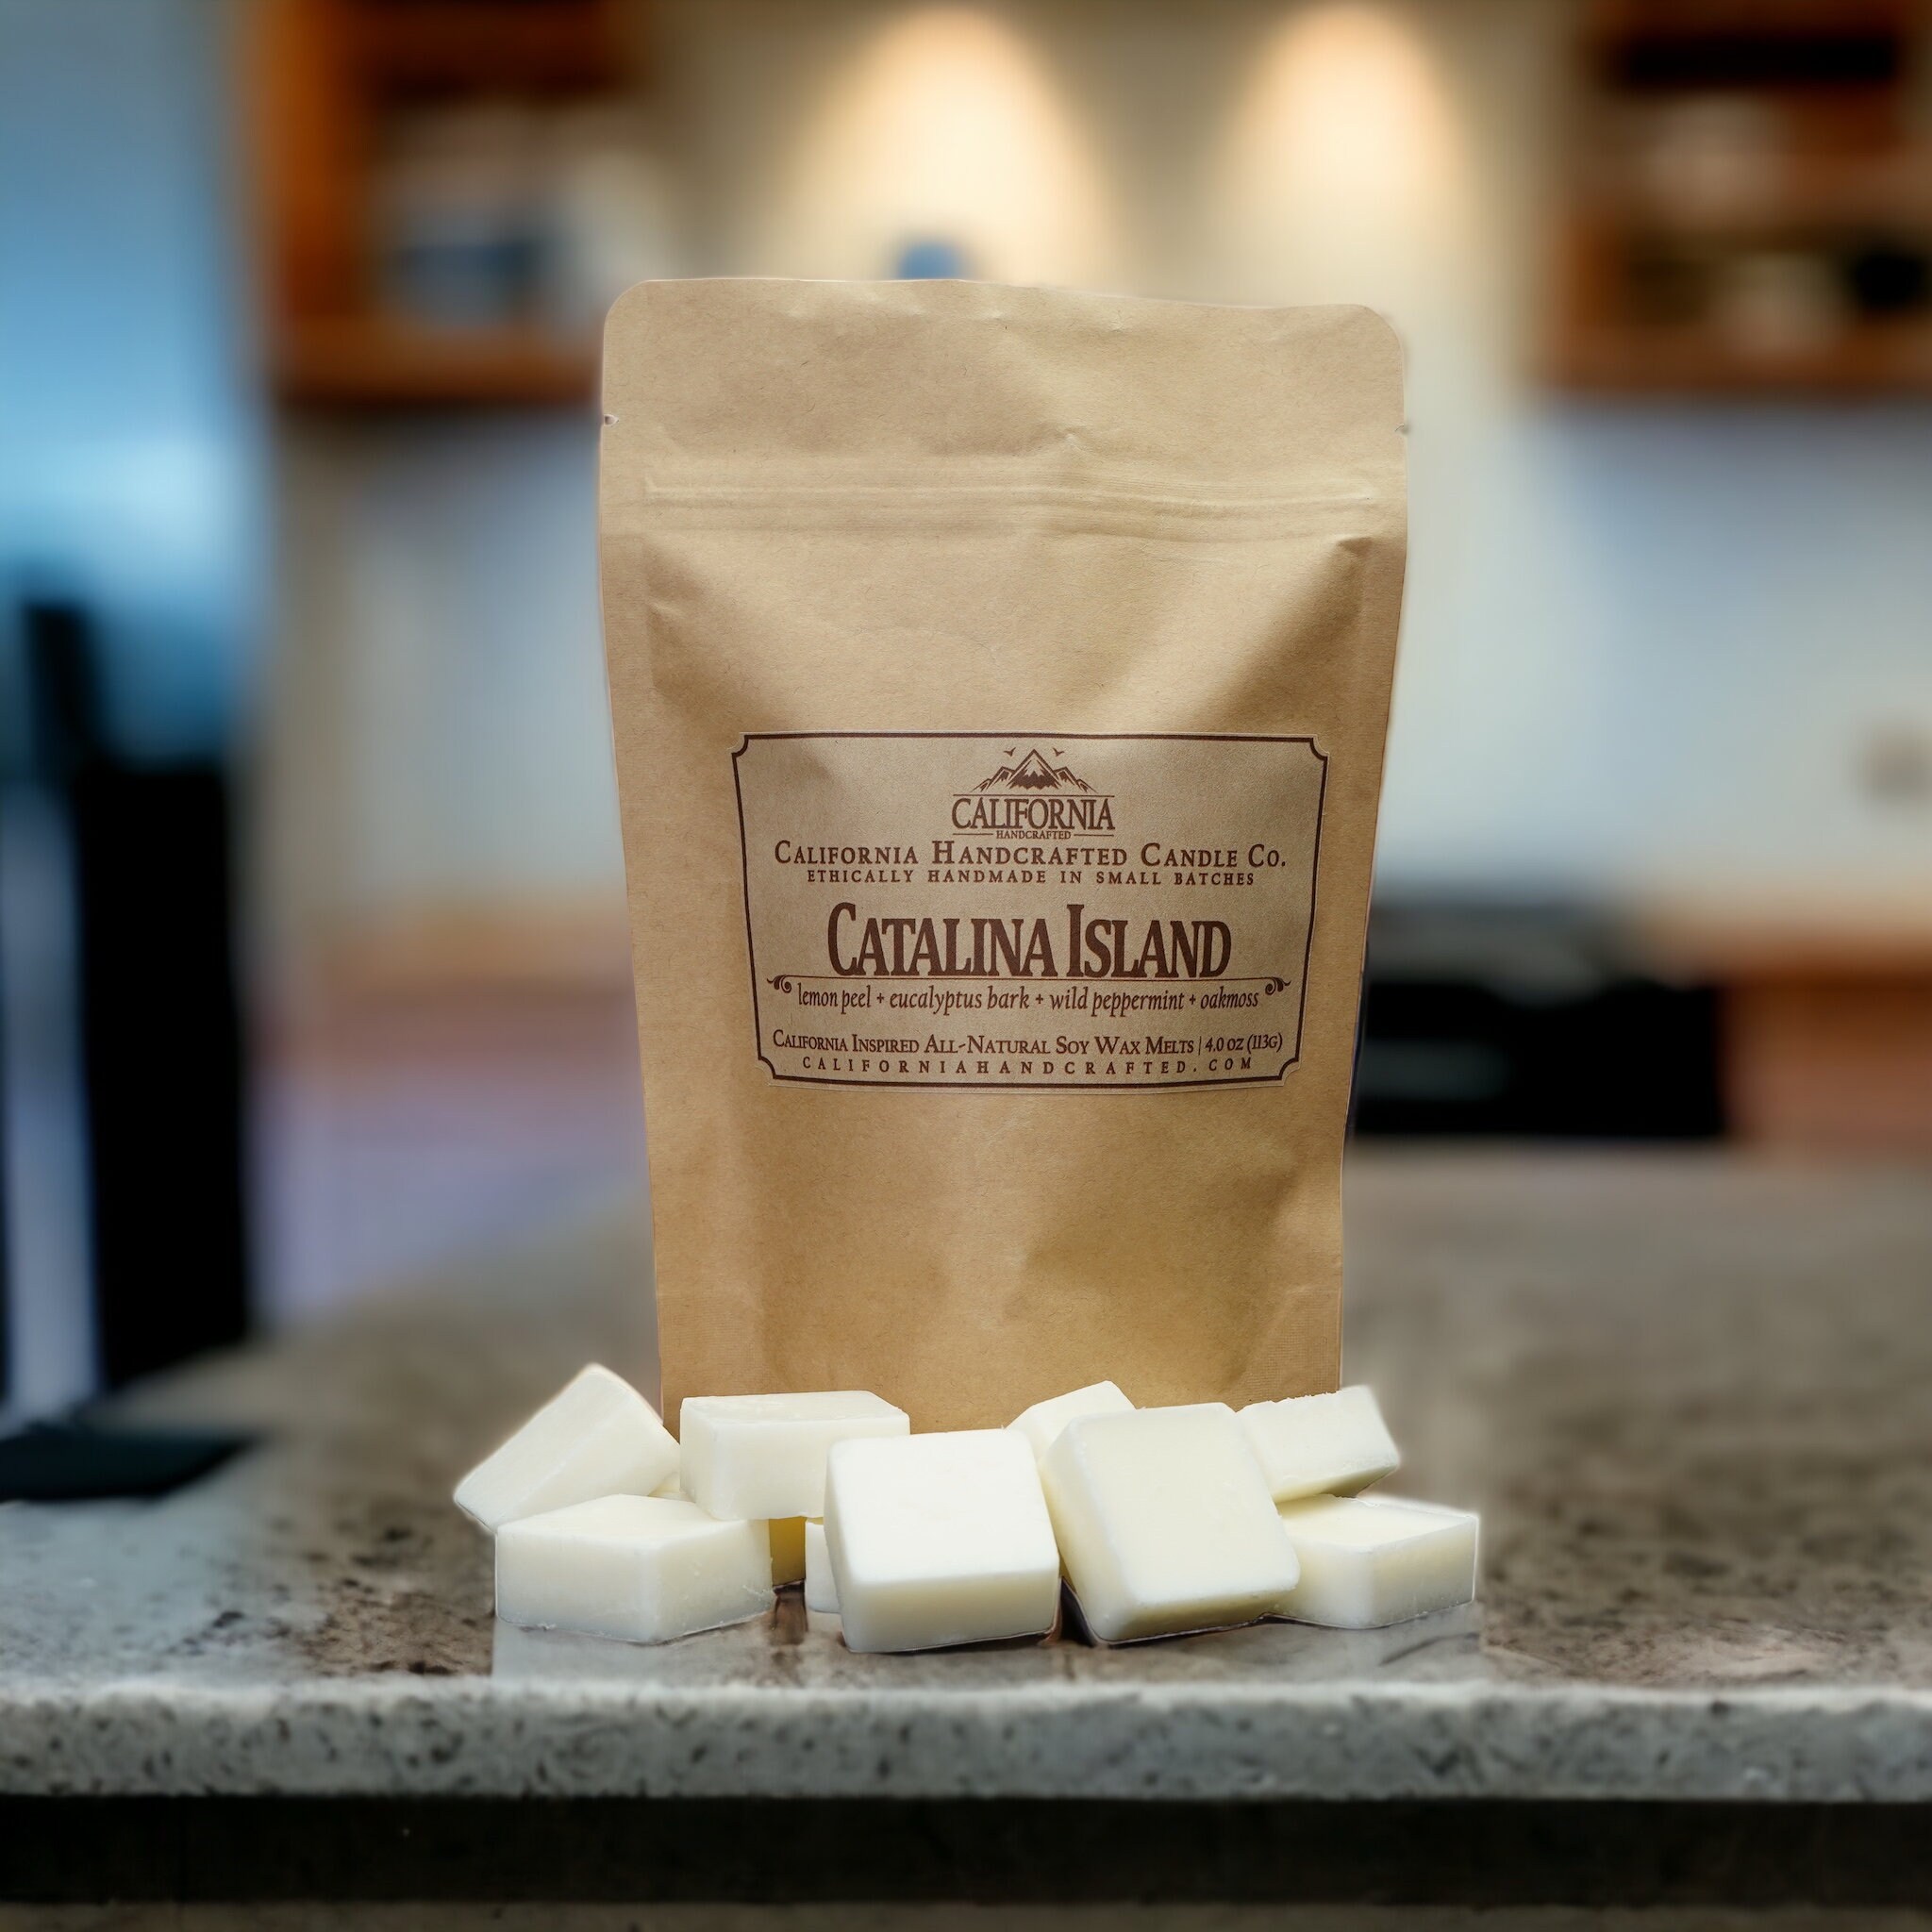  California Handcrafted Catalina Island Scented Soy Wax Melts :  Handmade Products